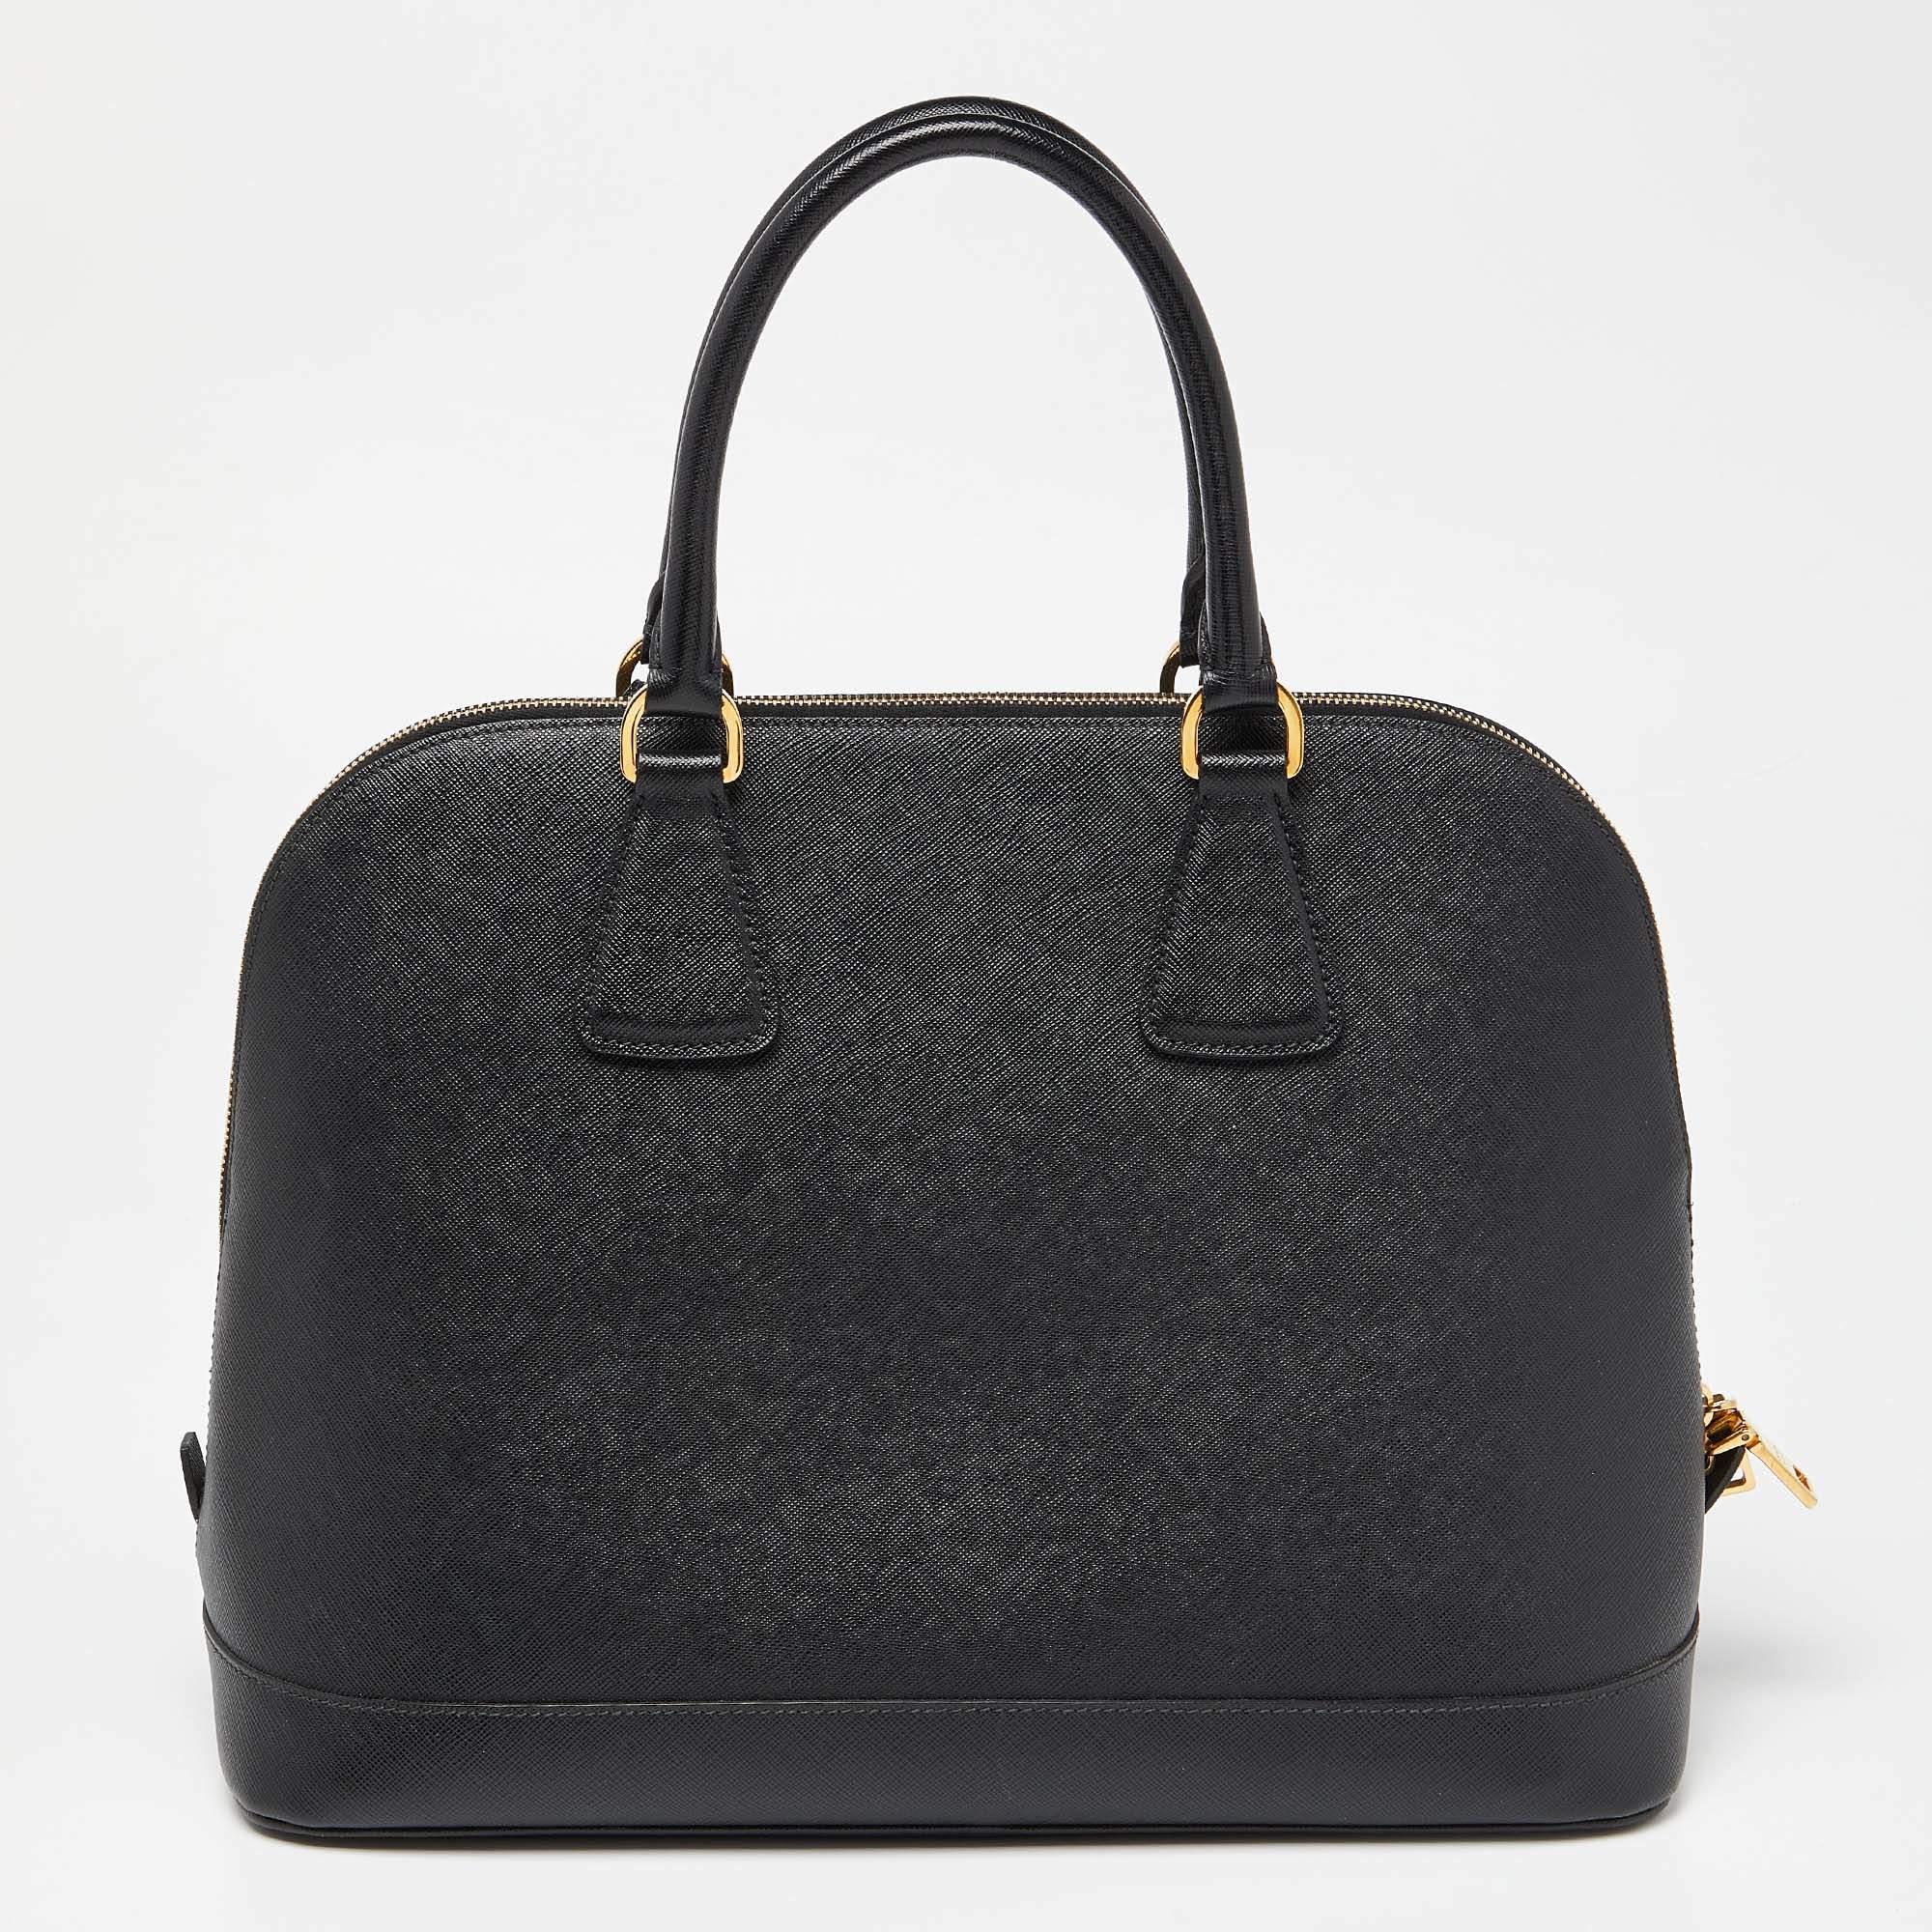 This satchel is rendered in the finest quality materials into an elegant design. Versatile and functional, it is well-sized for your daily use.